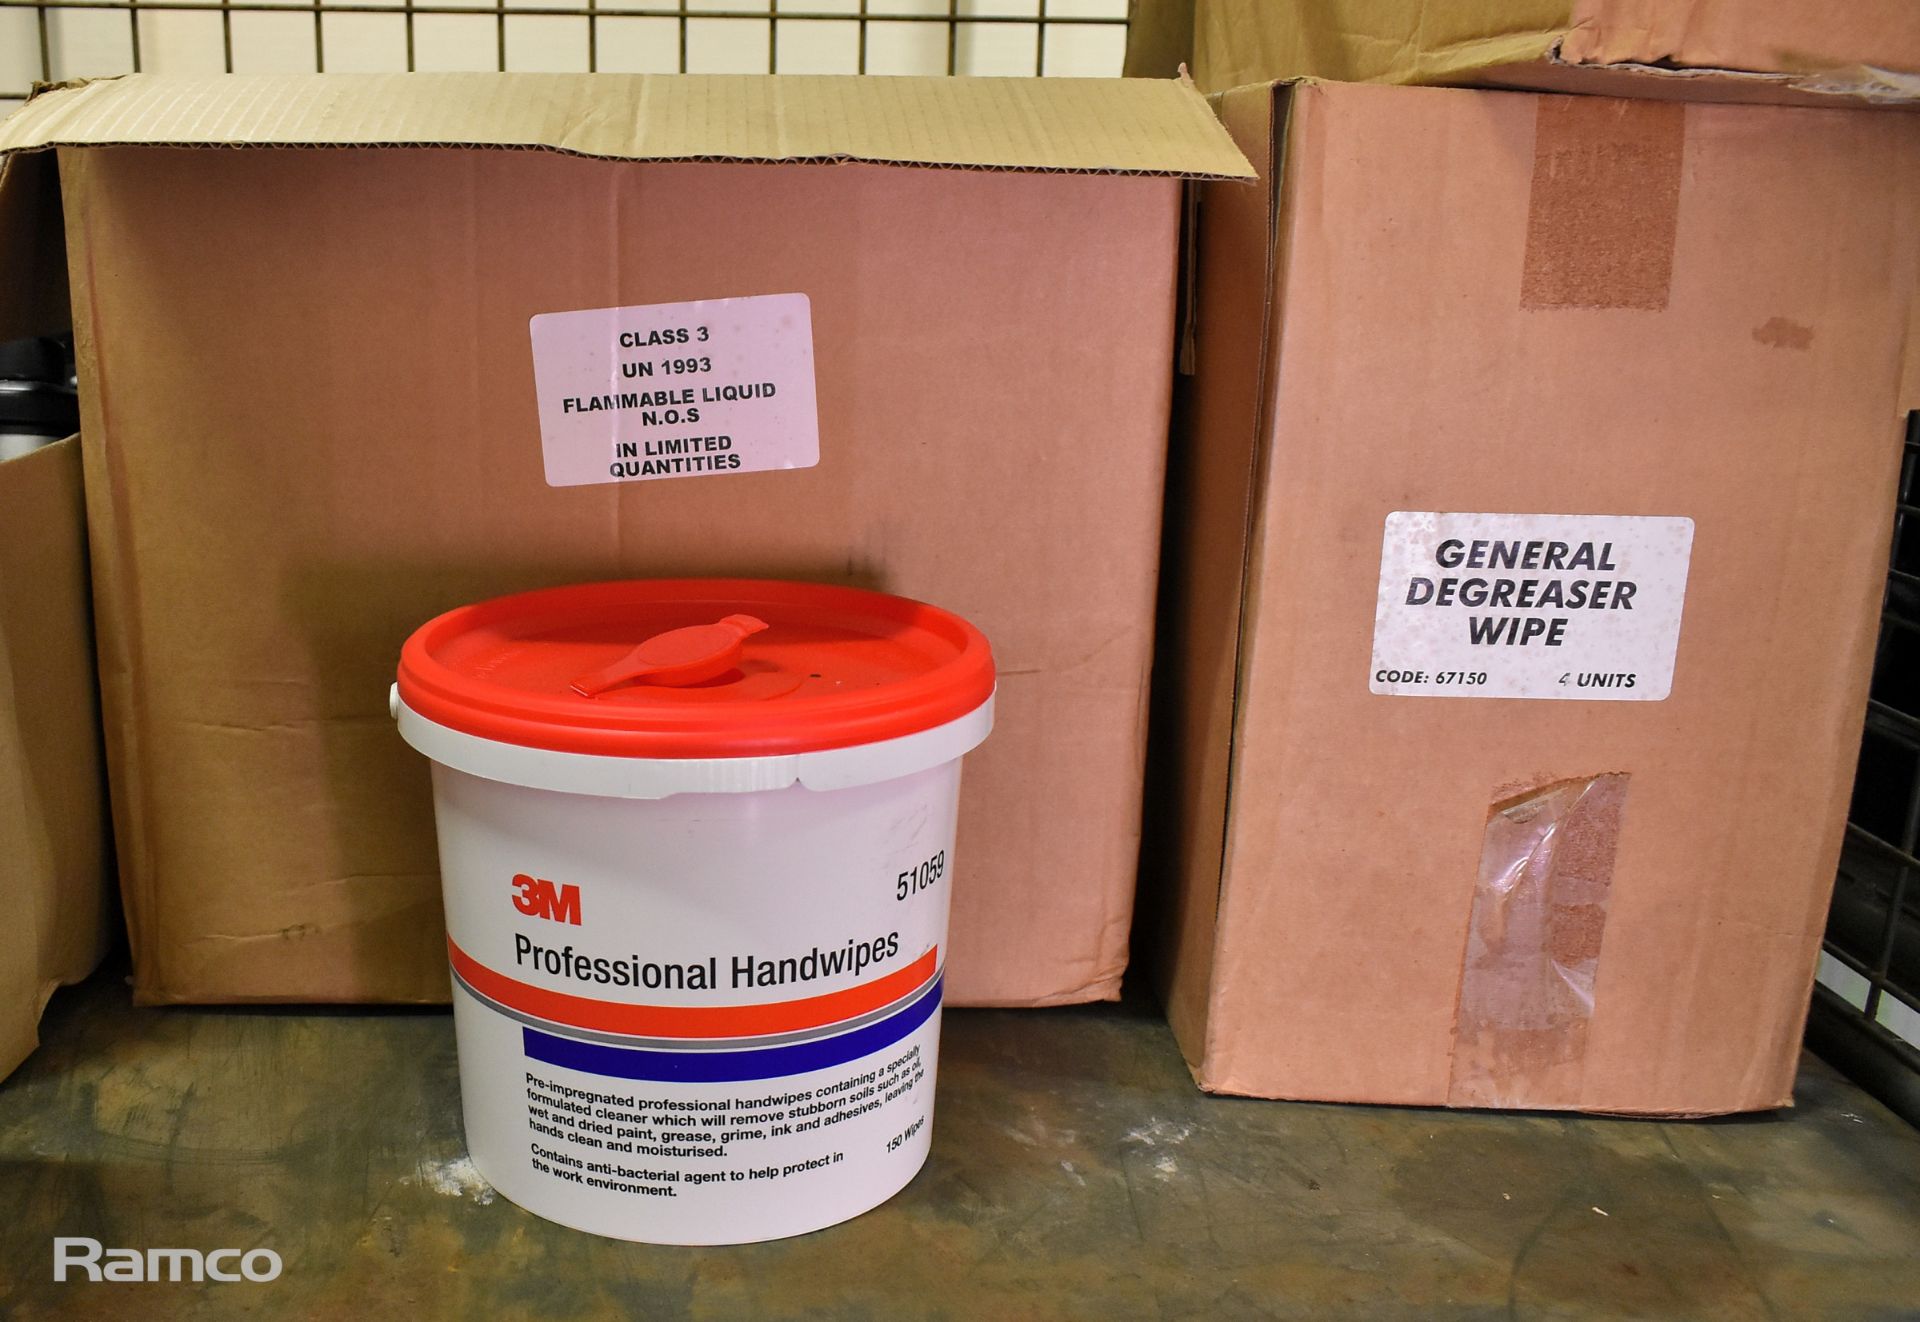 Garage consumables - Oils, lubricants, degreaser wipes - CANNOT BE SENT VIA PARCEL - Image 15 of 15